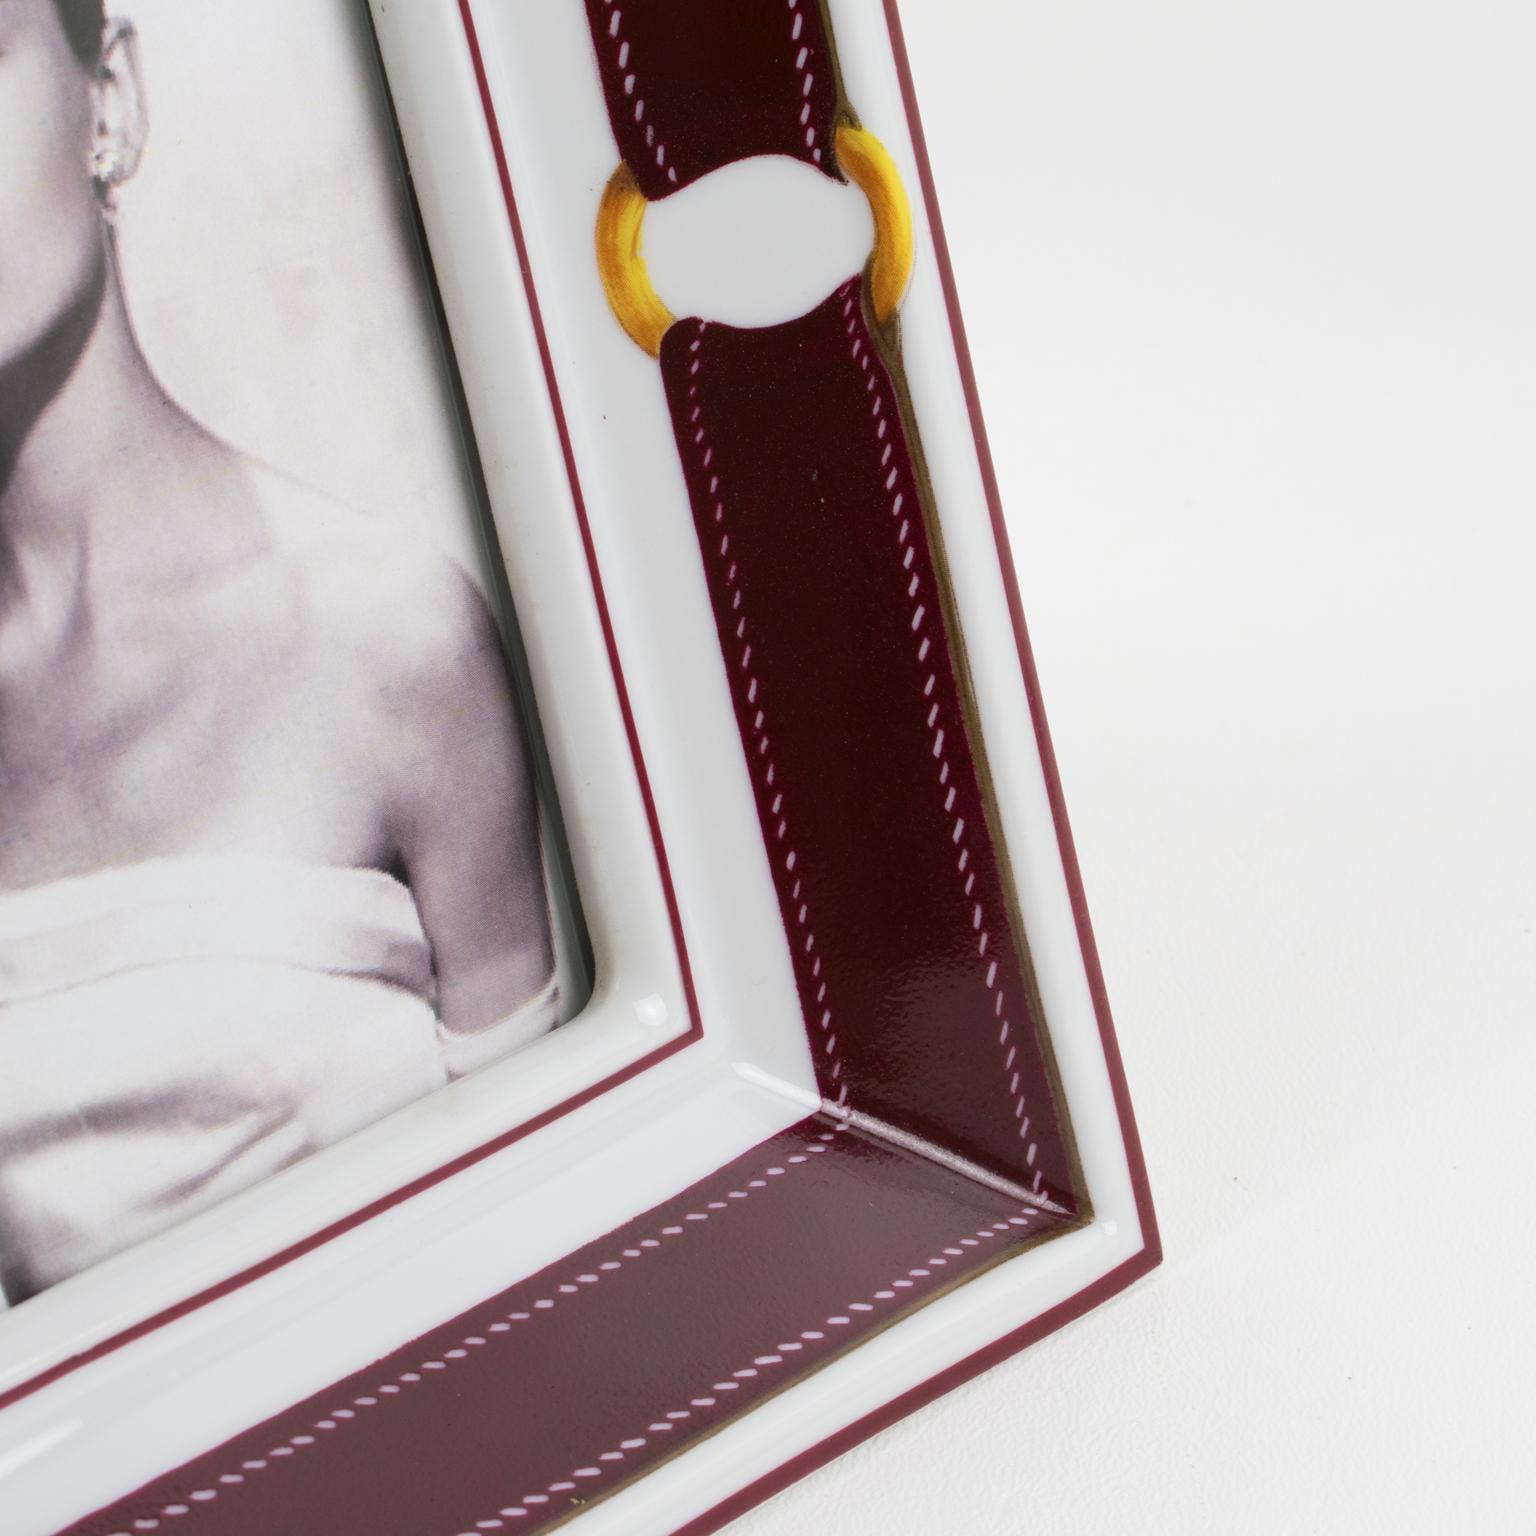 Mid-20th Century Hermes Paris White and Burgundy-Red Limoges Porcelain Picture Frame For Sale